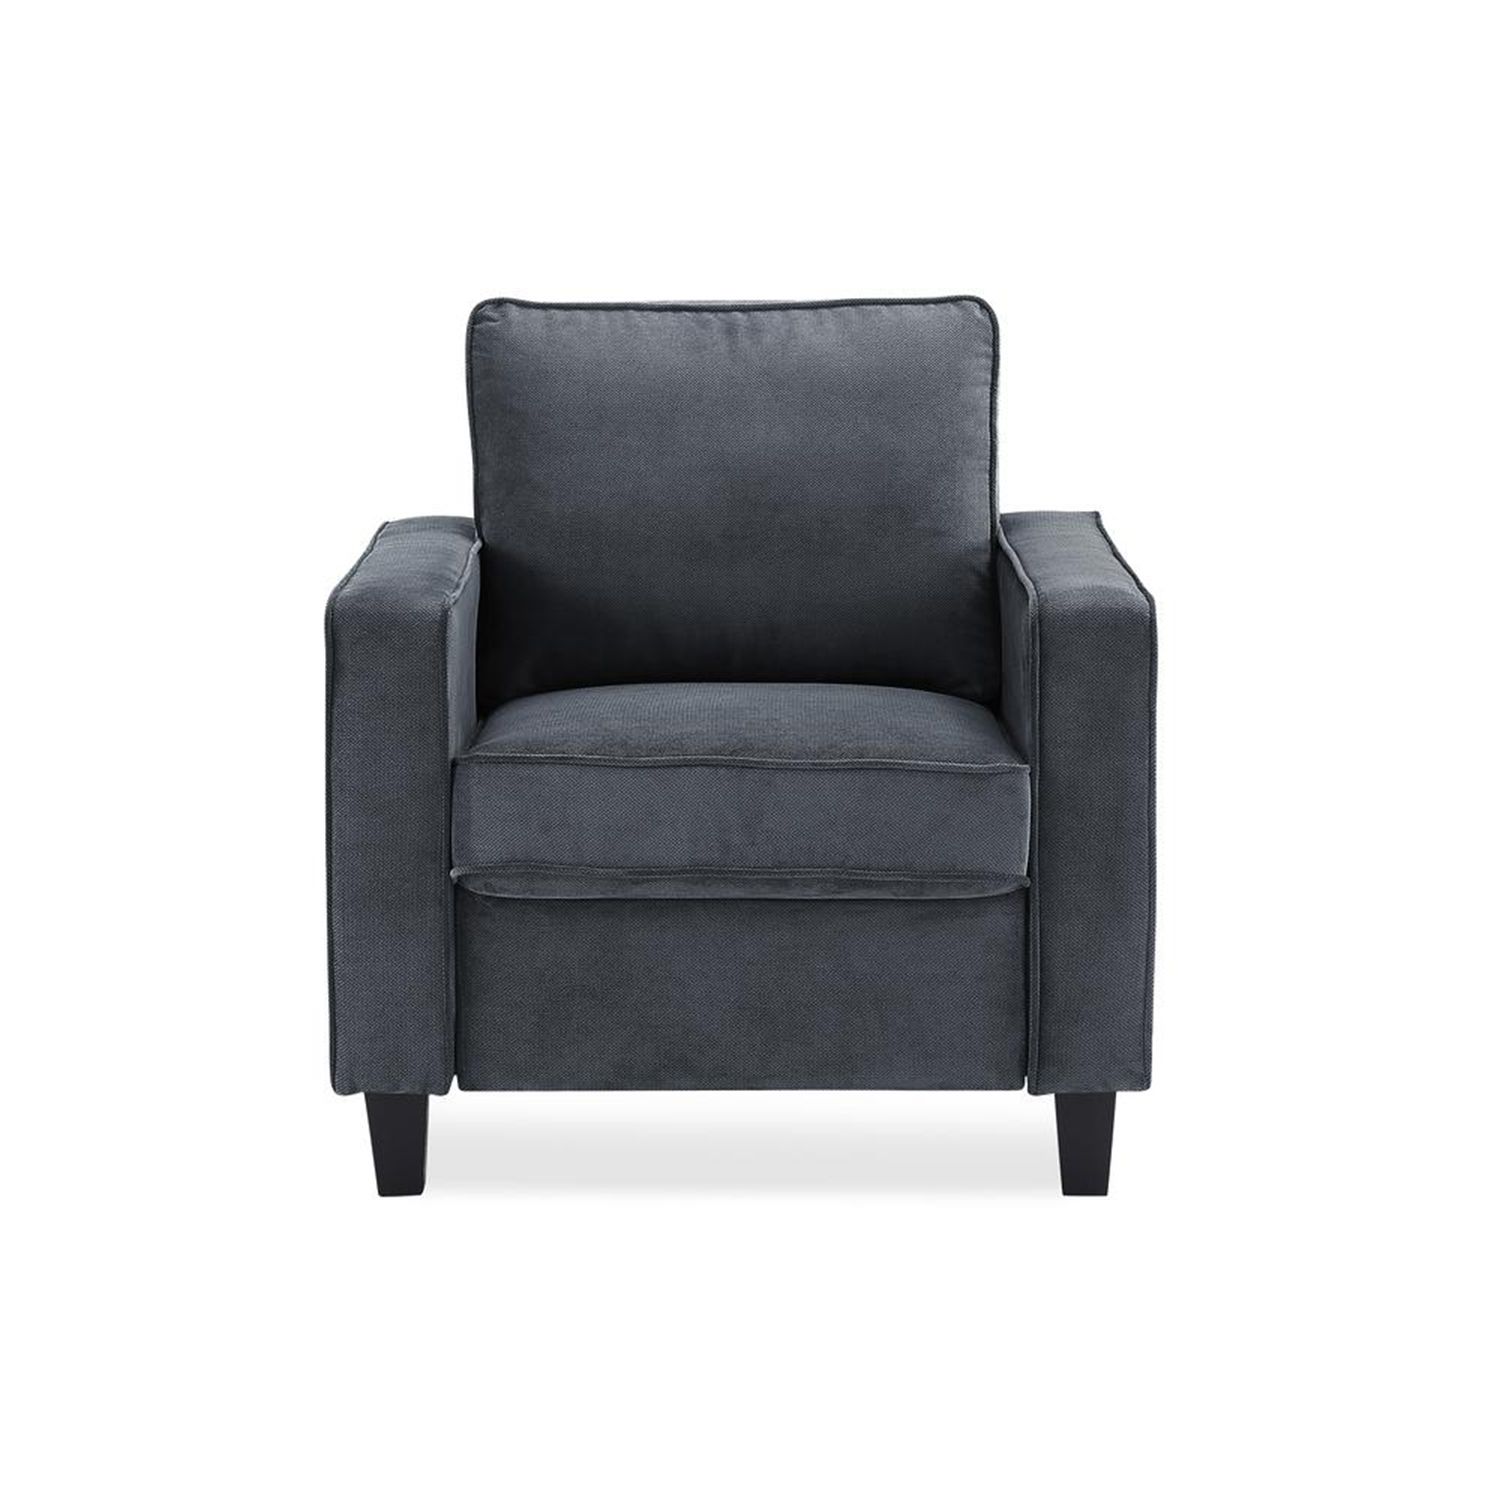 Lifestyle Solutions Garren Dark Grey Polyester Chair Lk Glm S1xm3011 Intended For Allie Dark Grey Sofa Chairs (Photo 14 of 25)